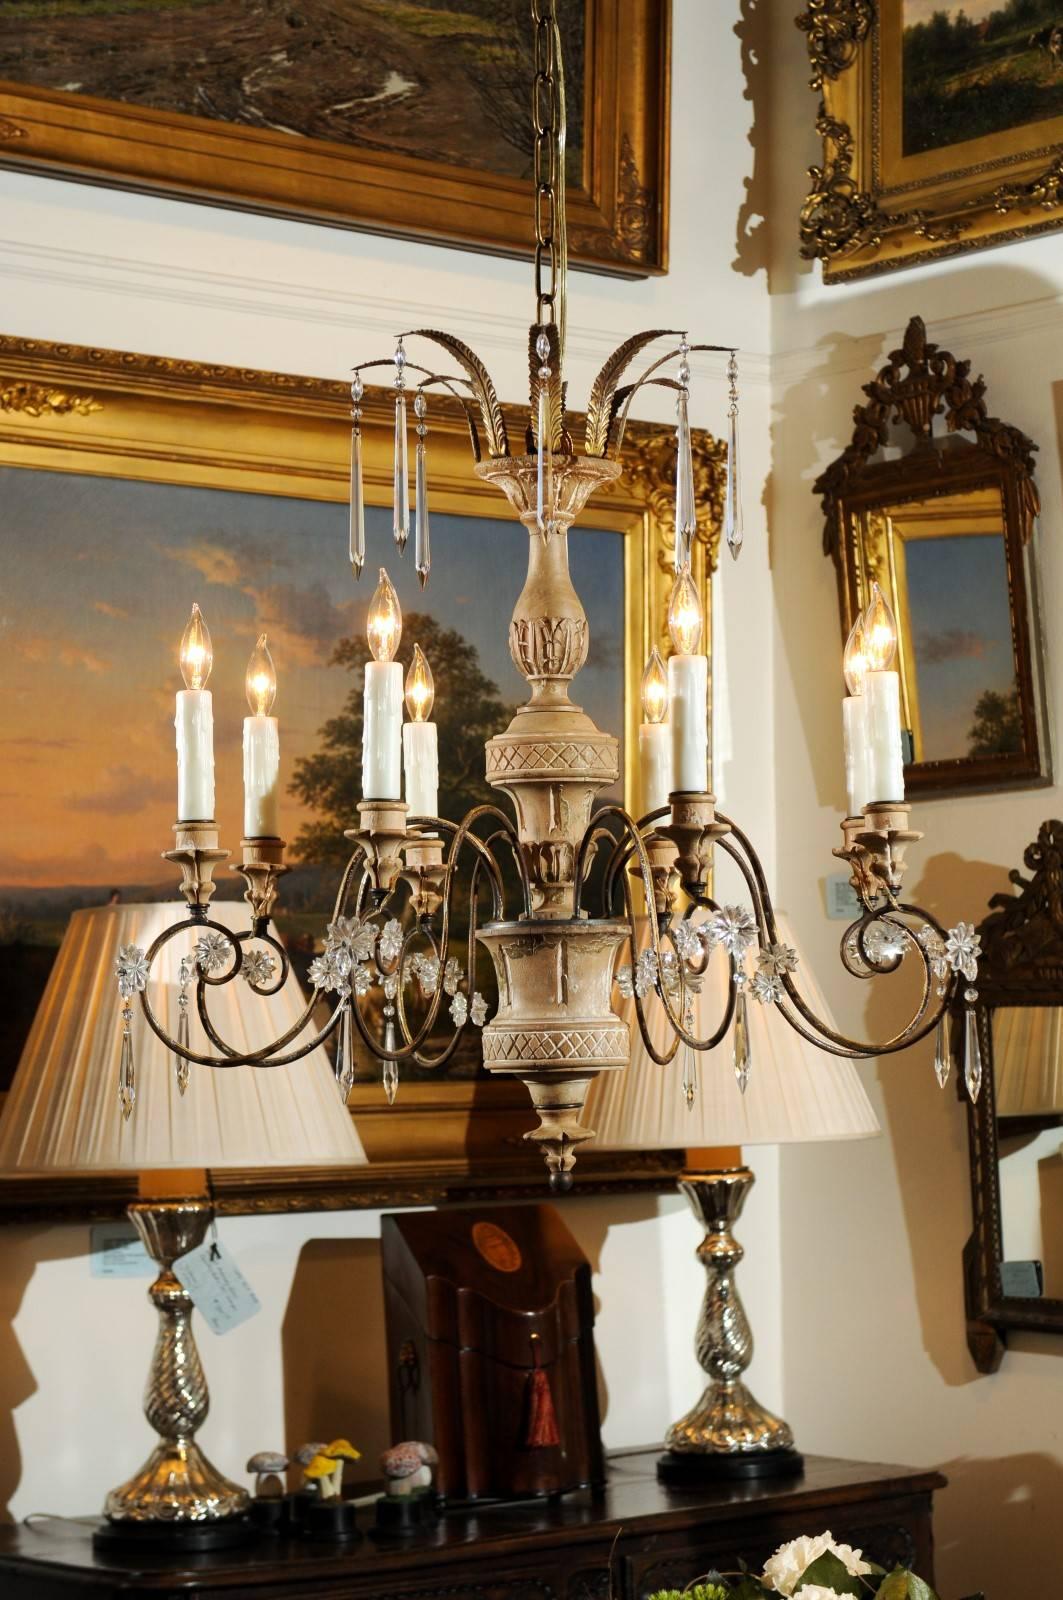 An Italian wood and gilt metal eight-light chandelier with central column, discreet crystals and foliage motifs from the late 19th century. This Italian chandelier features a central wooden column, carved with waterleaves and cross motifs, topped